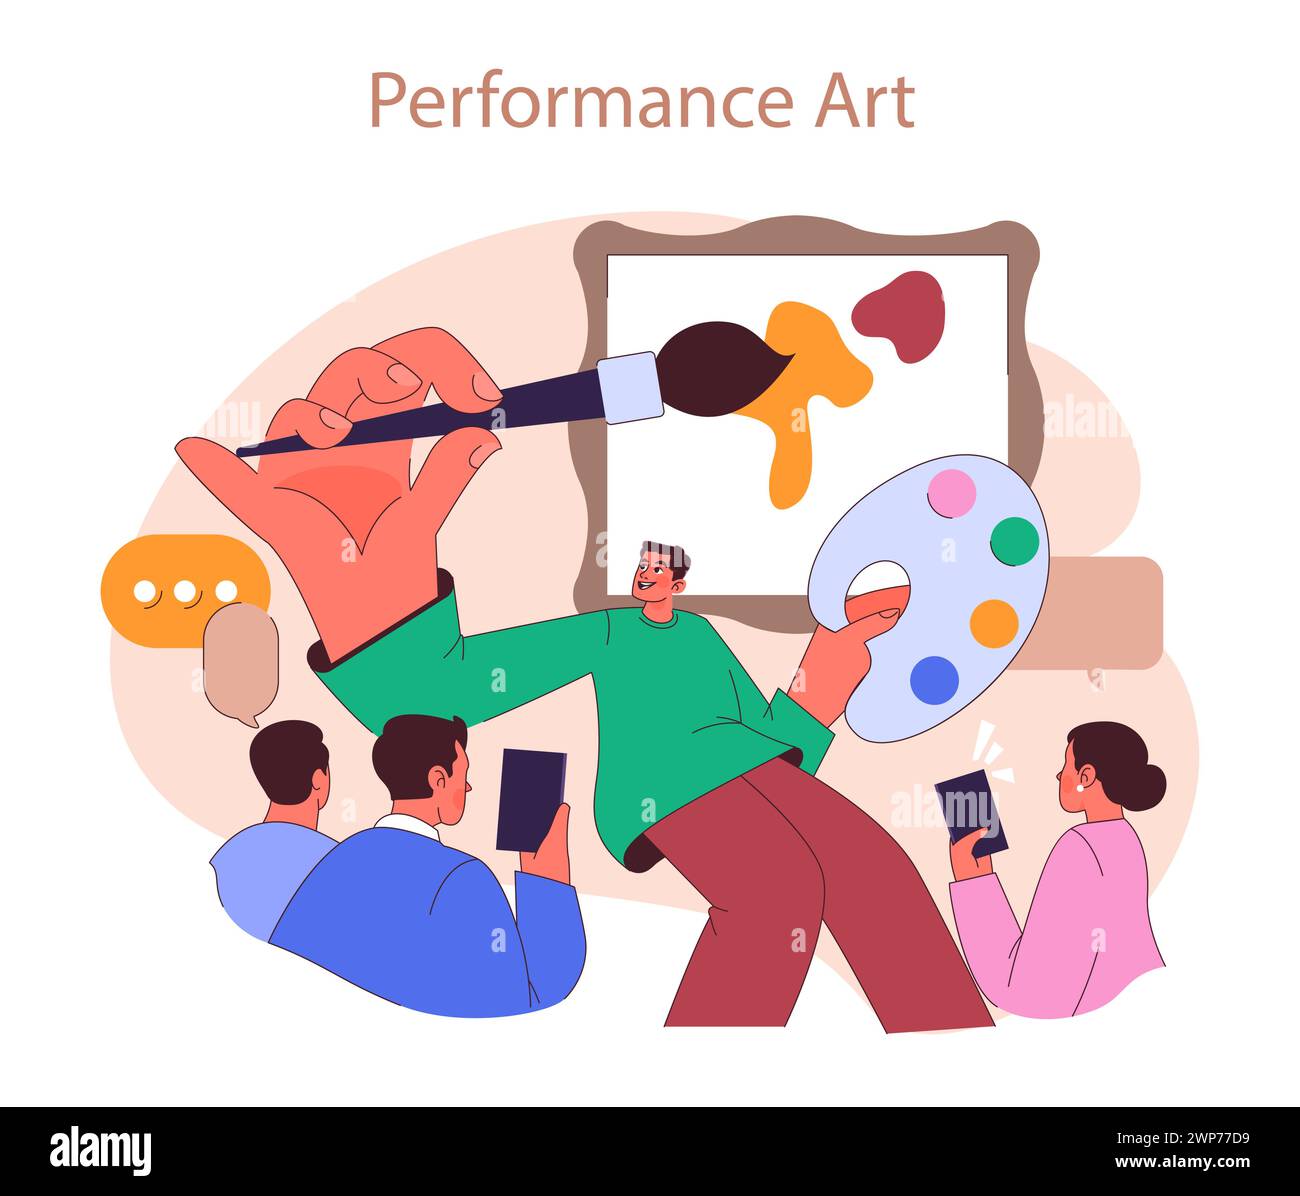 Museum or art gallery. Dynamic performance art with an expressive artist drawing a painting, while visitors taking a photos or streaming a live video. Flat vector illustration Stock Vector